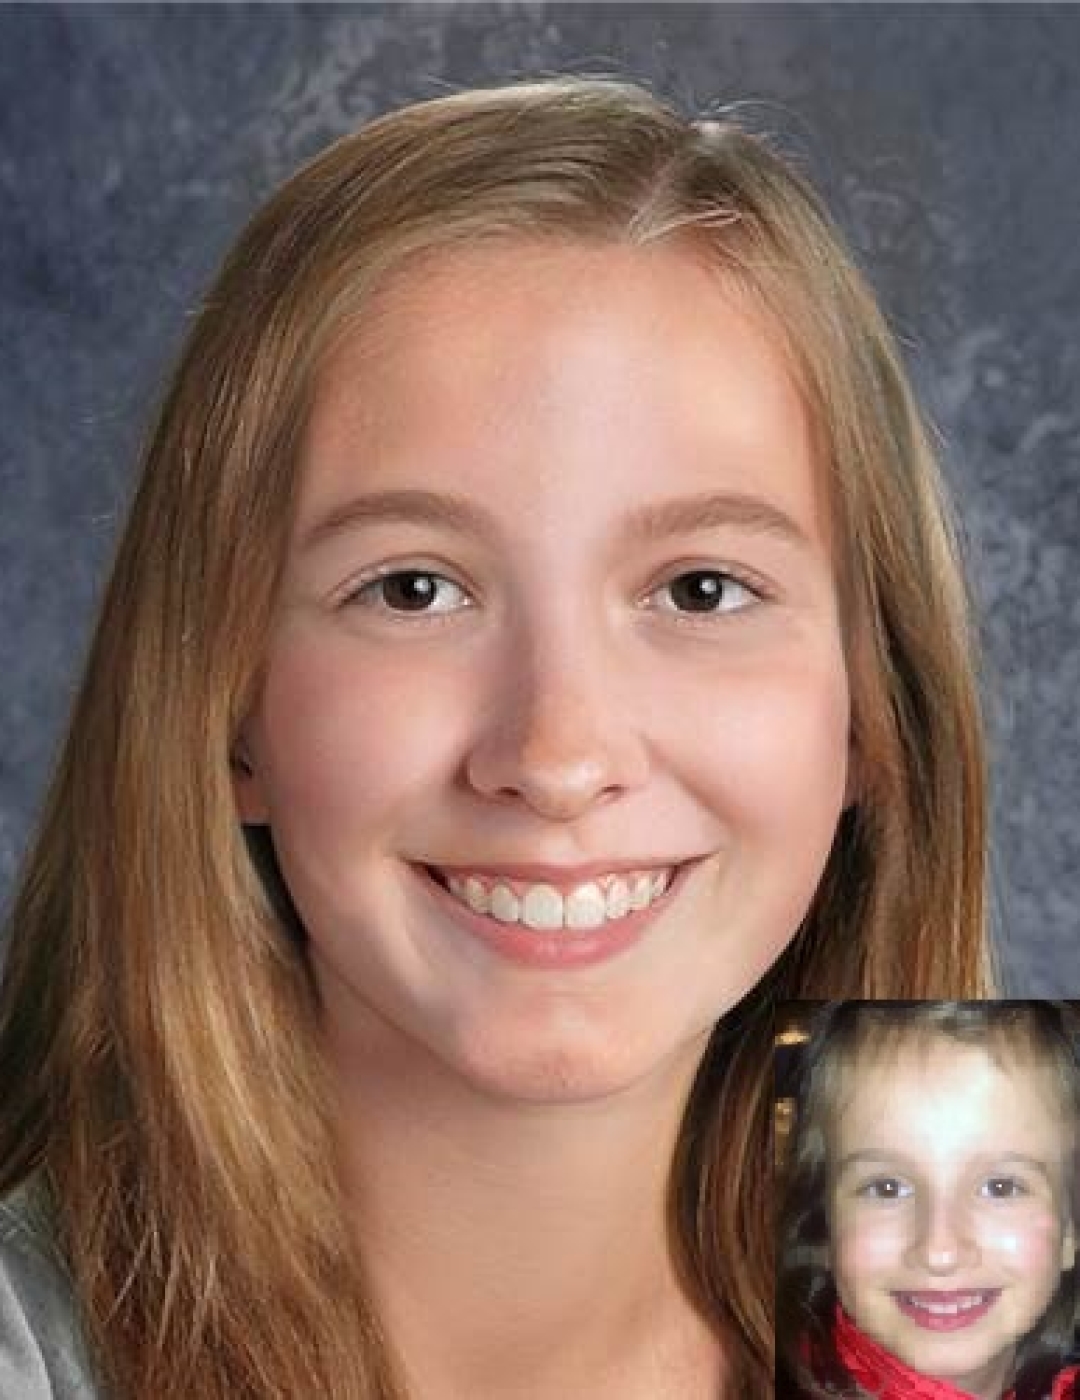 Julia Potter. Missing child with blonde hair and brown eyes.